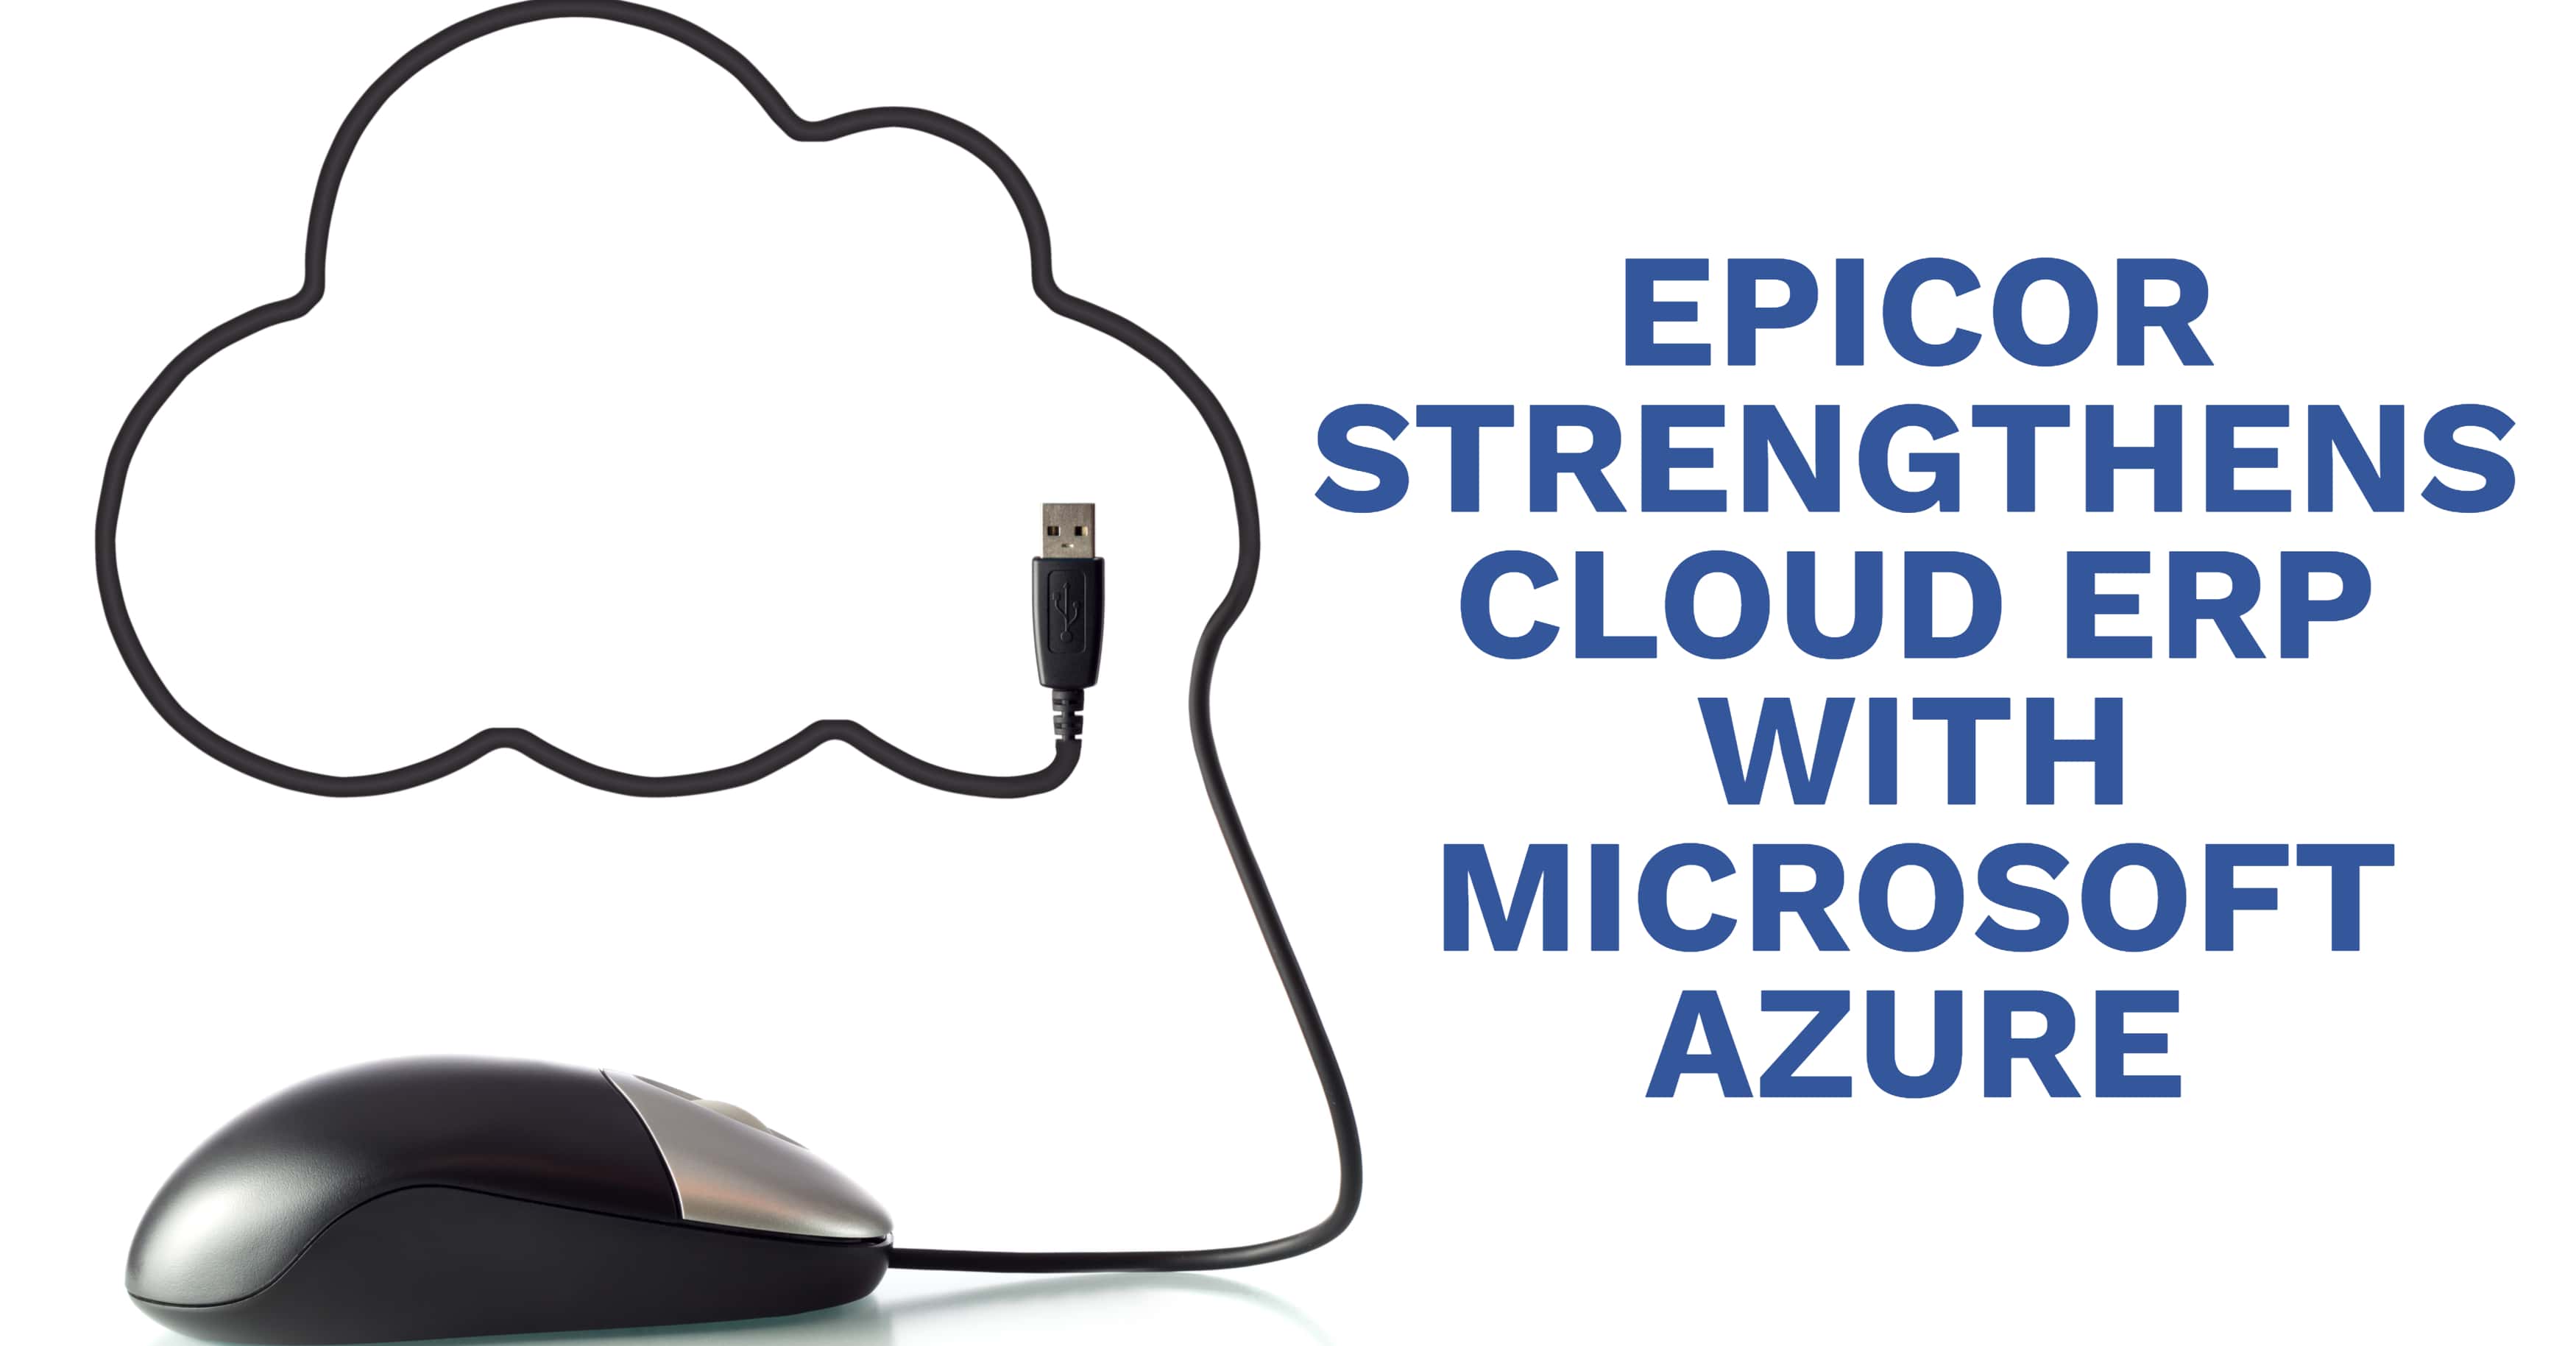 Epicor Strengthens Cloud ERP with Microsoft Azure